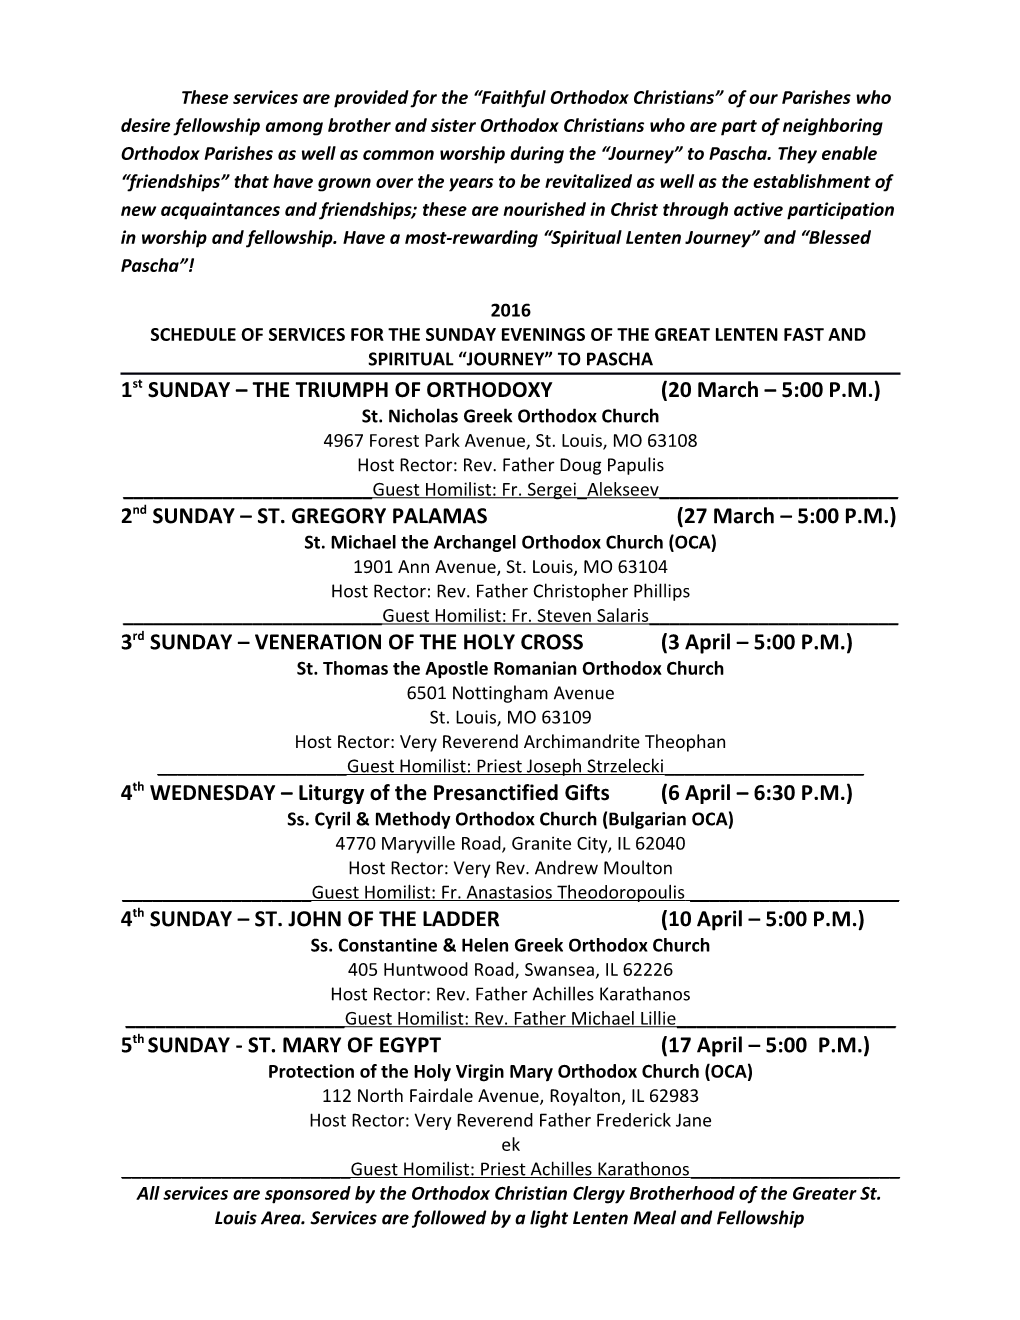 Schedule of Services for the Sunday Evenings of the Great Lenten Fast And